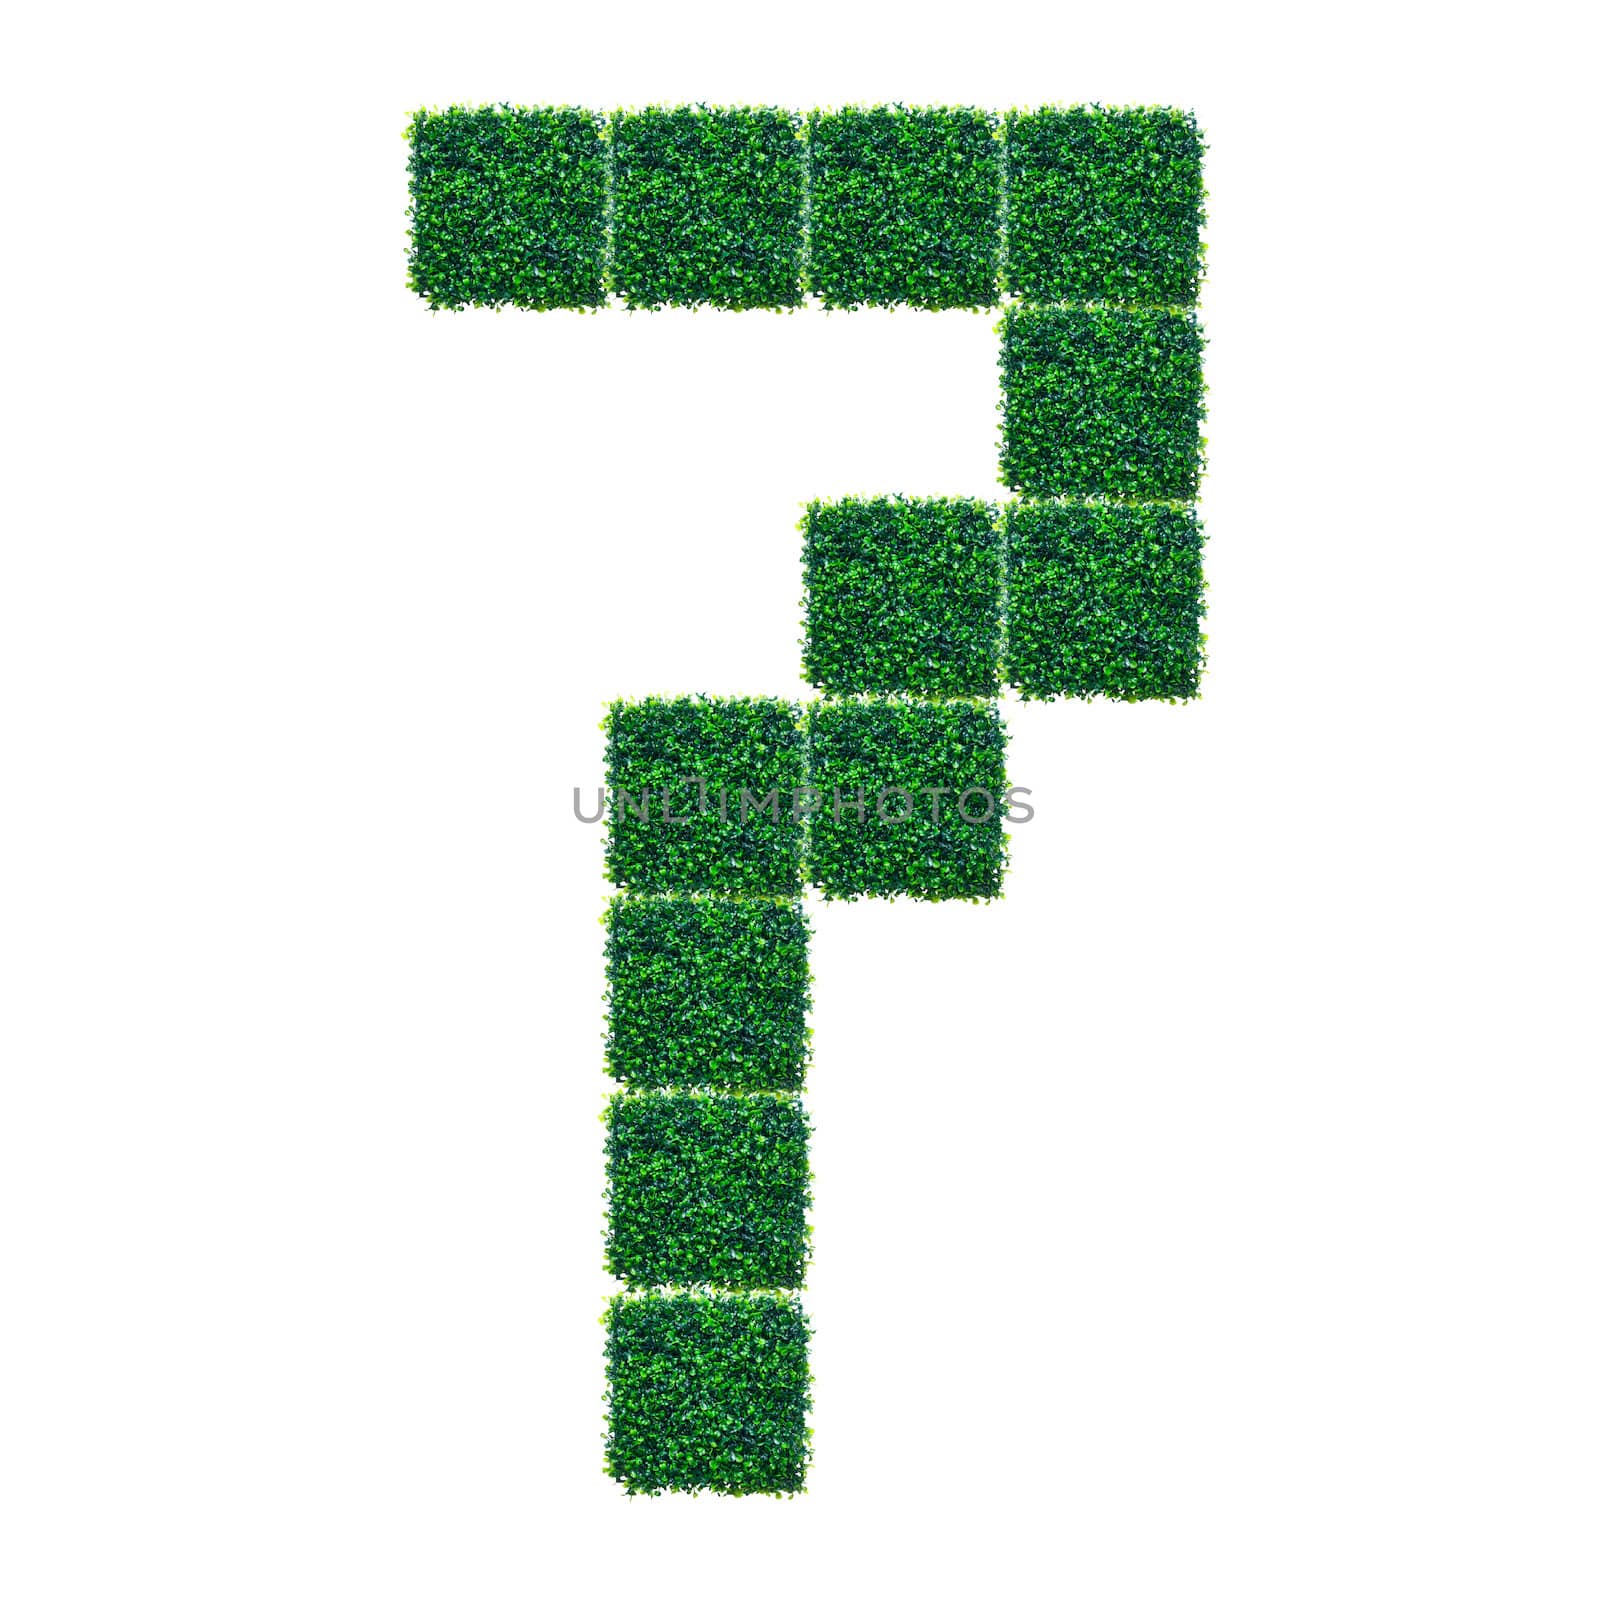 Number Seven made from Artificial Grass on white background.